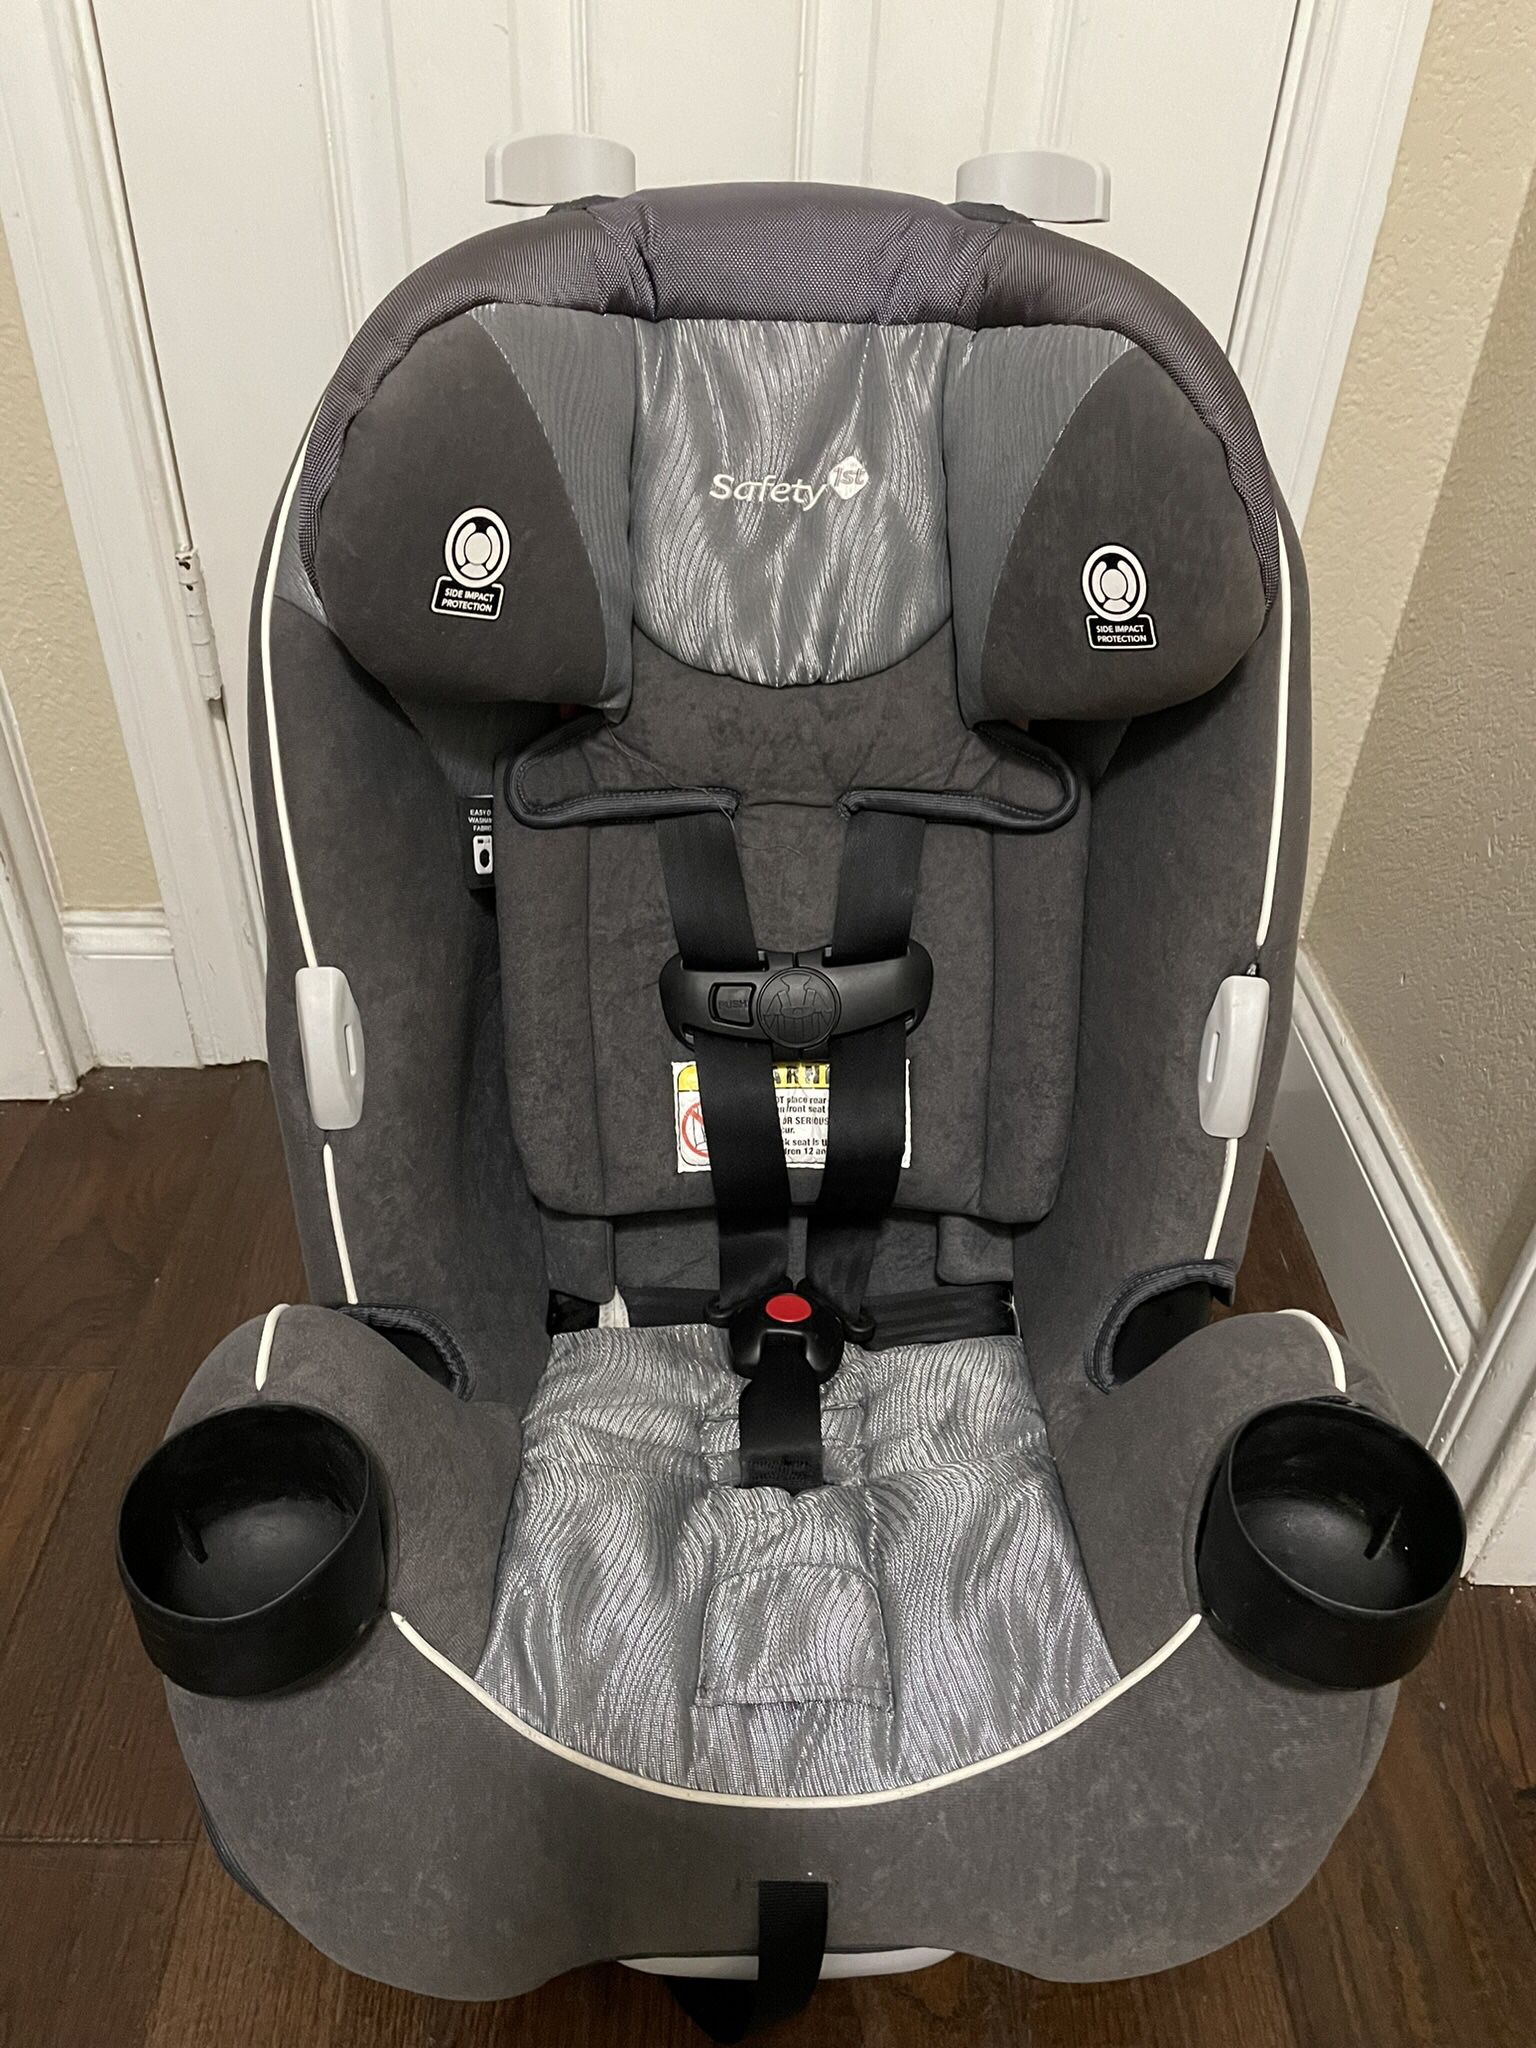 Safety 1st Grow And Go Convertible Car Seat